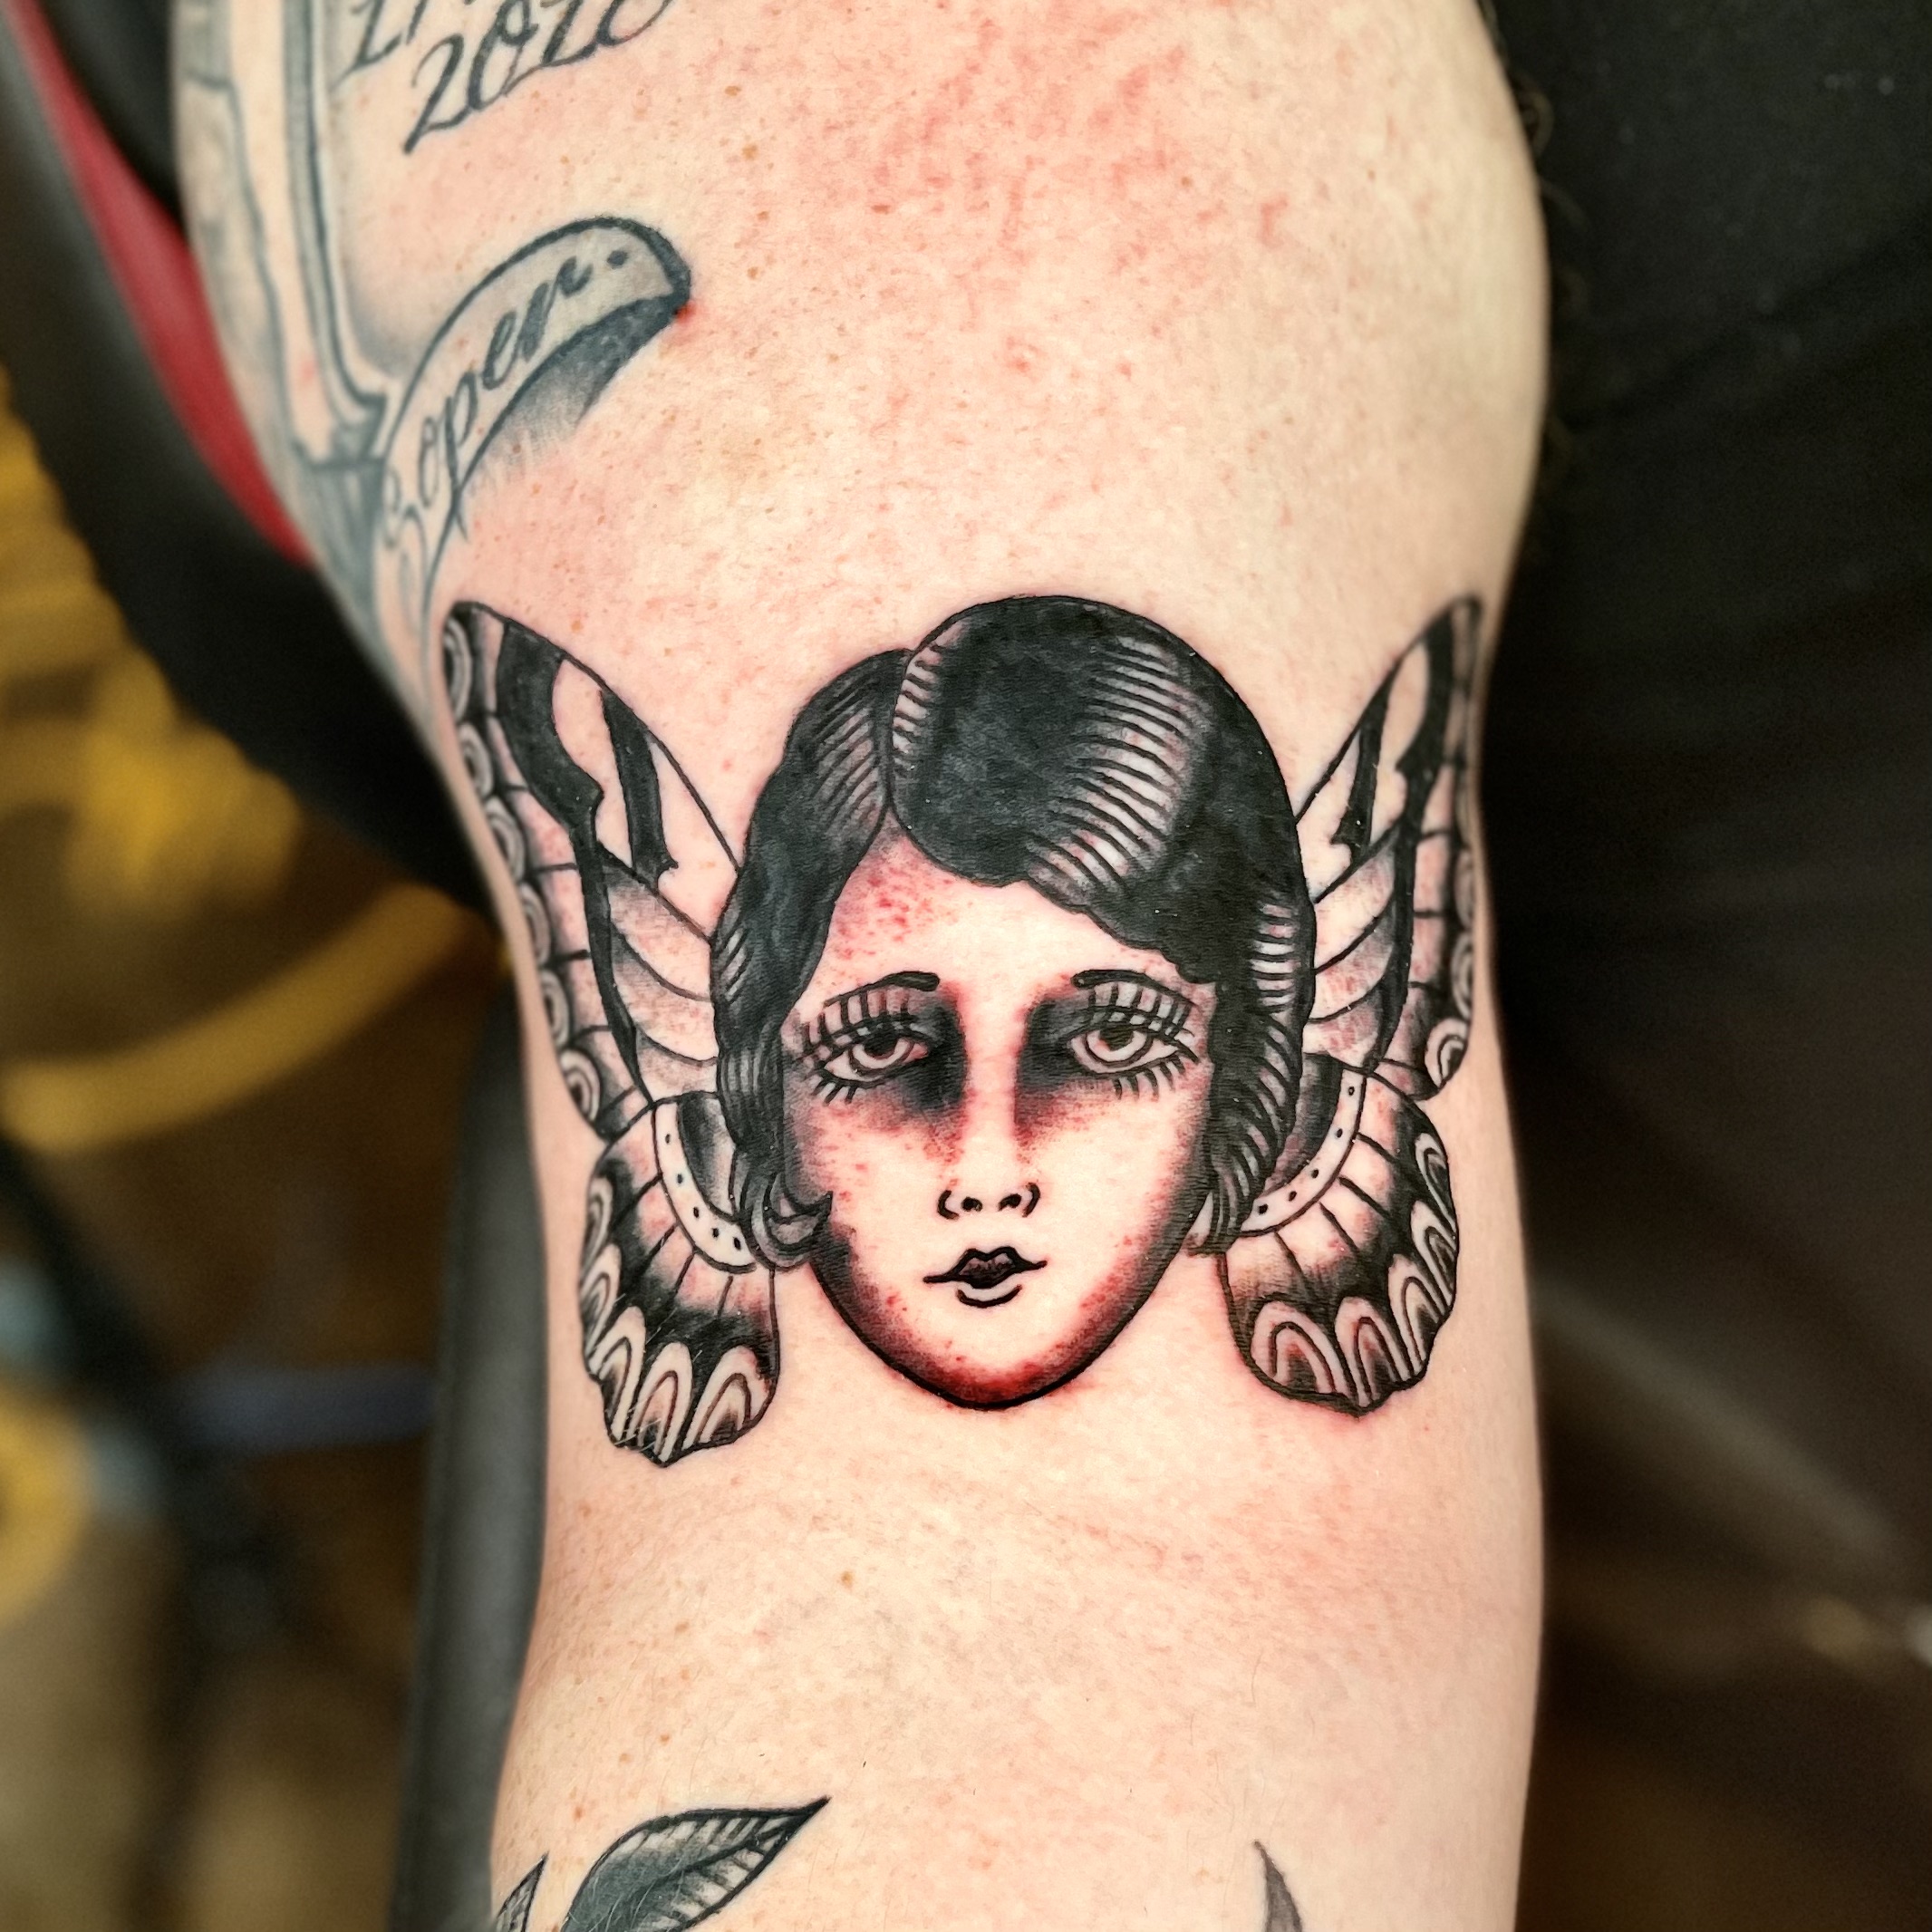 Tattoo of a woman and butterfly wings